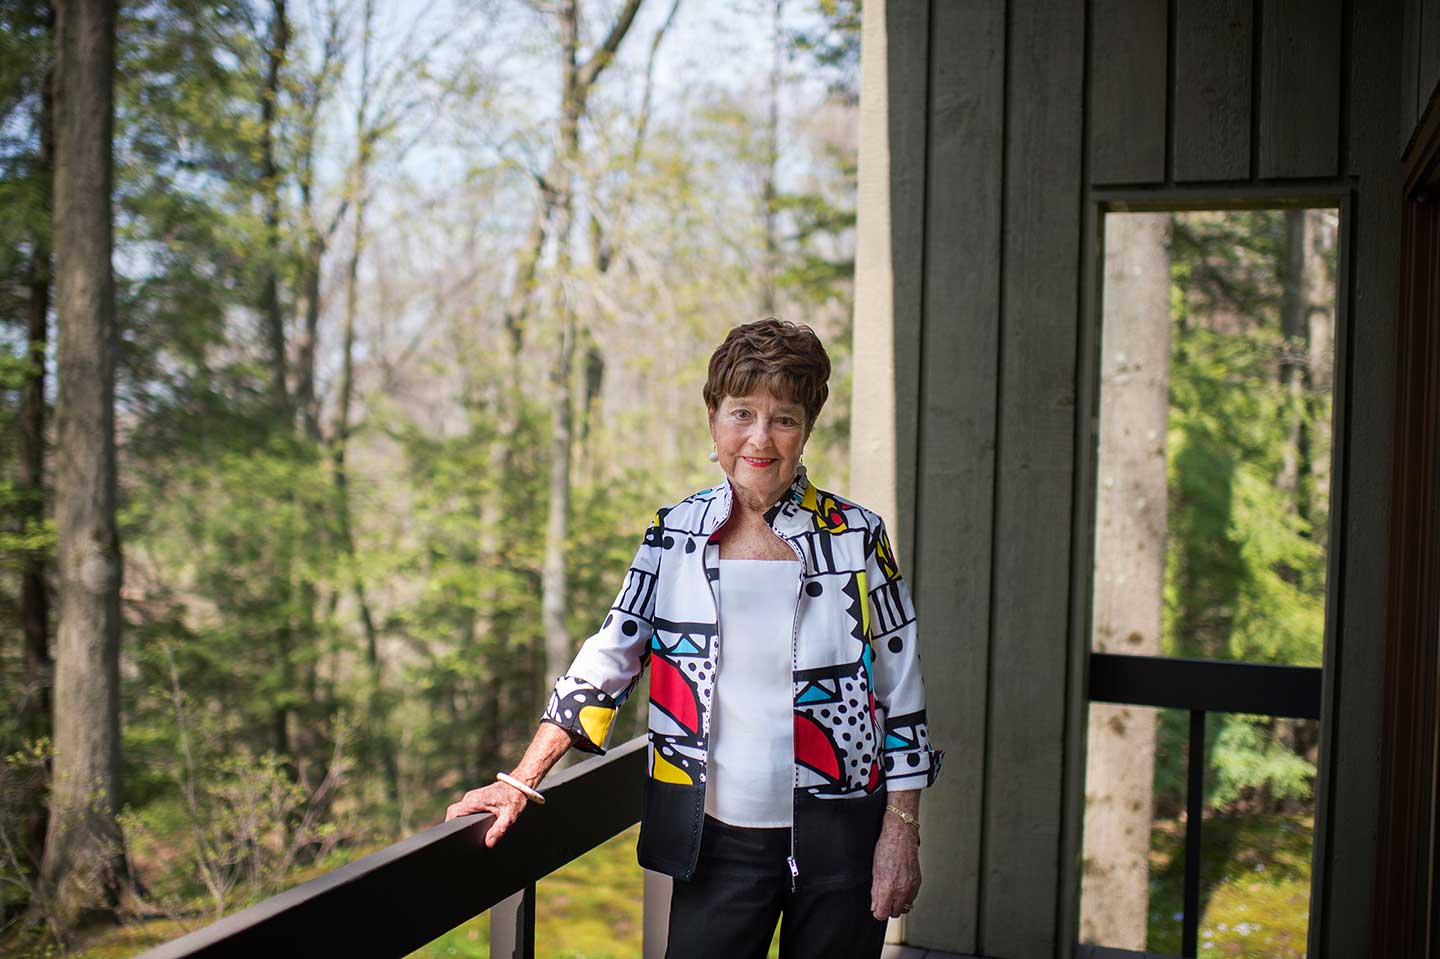 Though Grasselli Brown retired from Standard Oil Company in 1989, her scientific ambitions and philanthropic support for multiple organizations remains. Photo by Dustin Franz, BSVC ’10